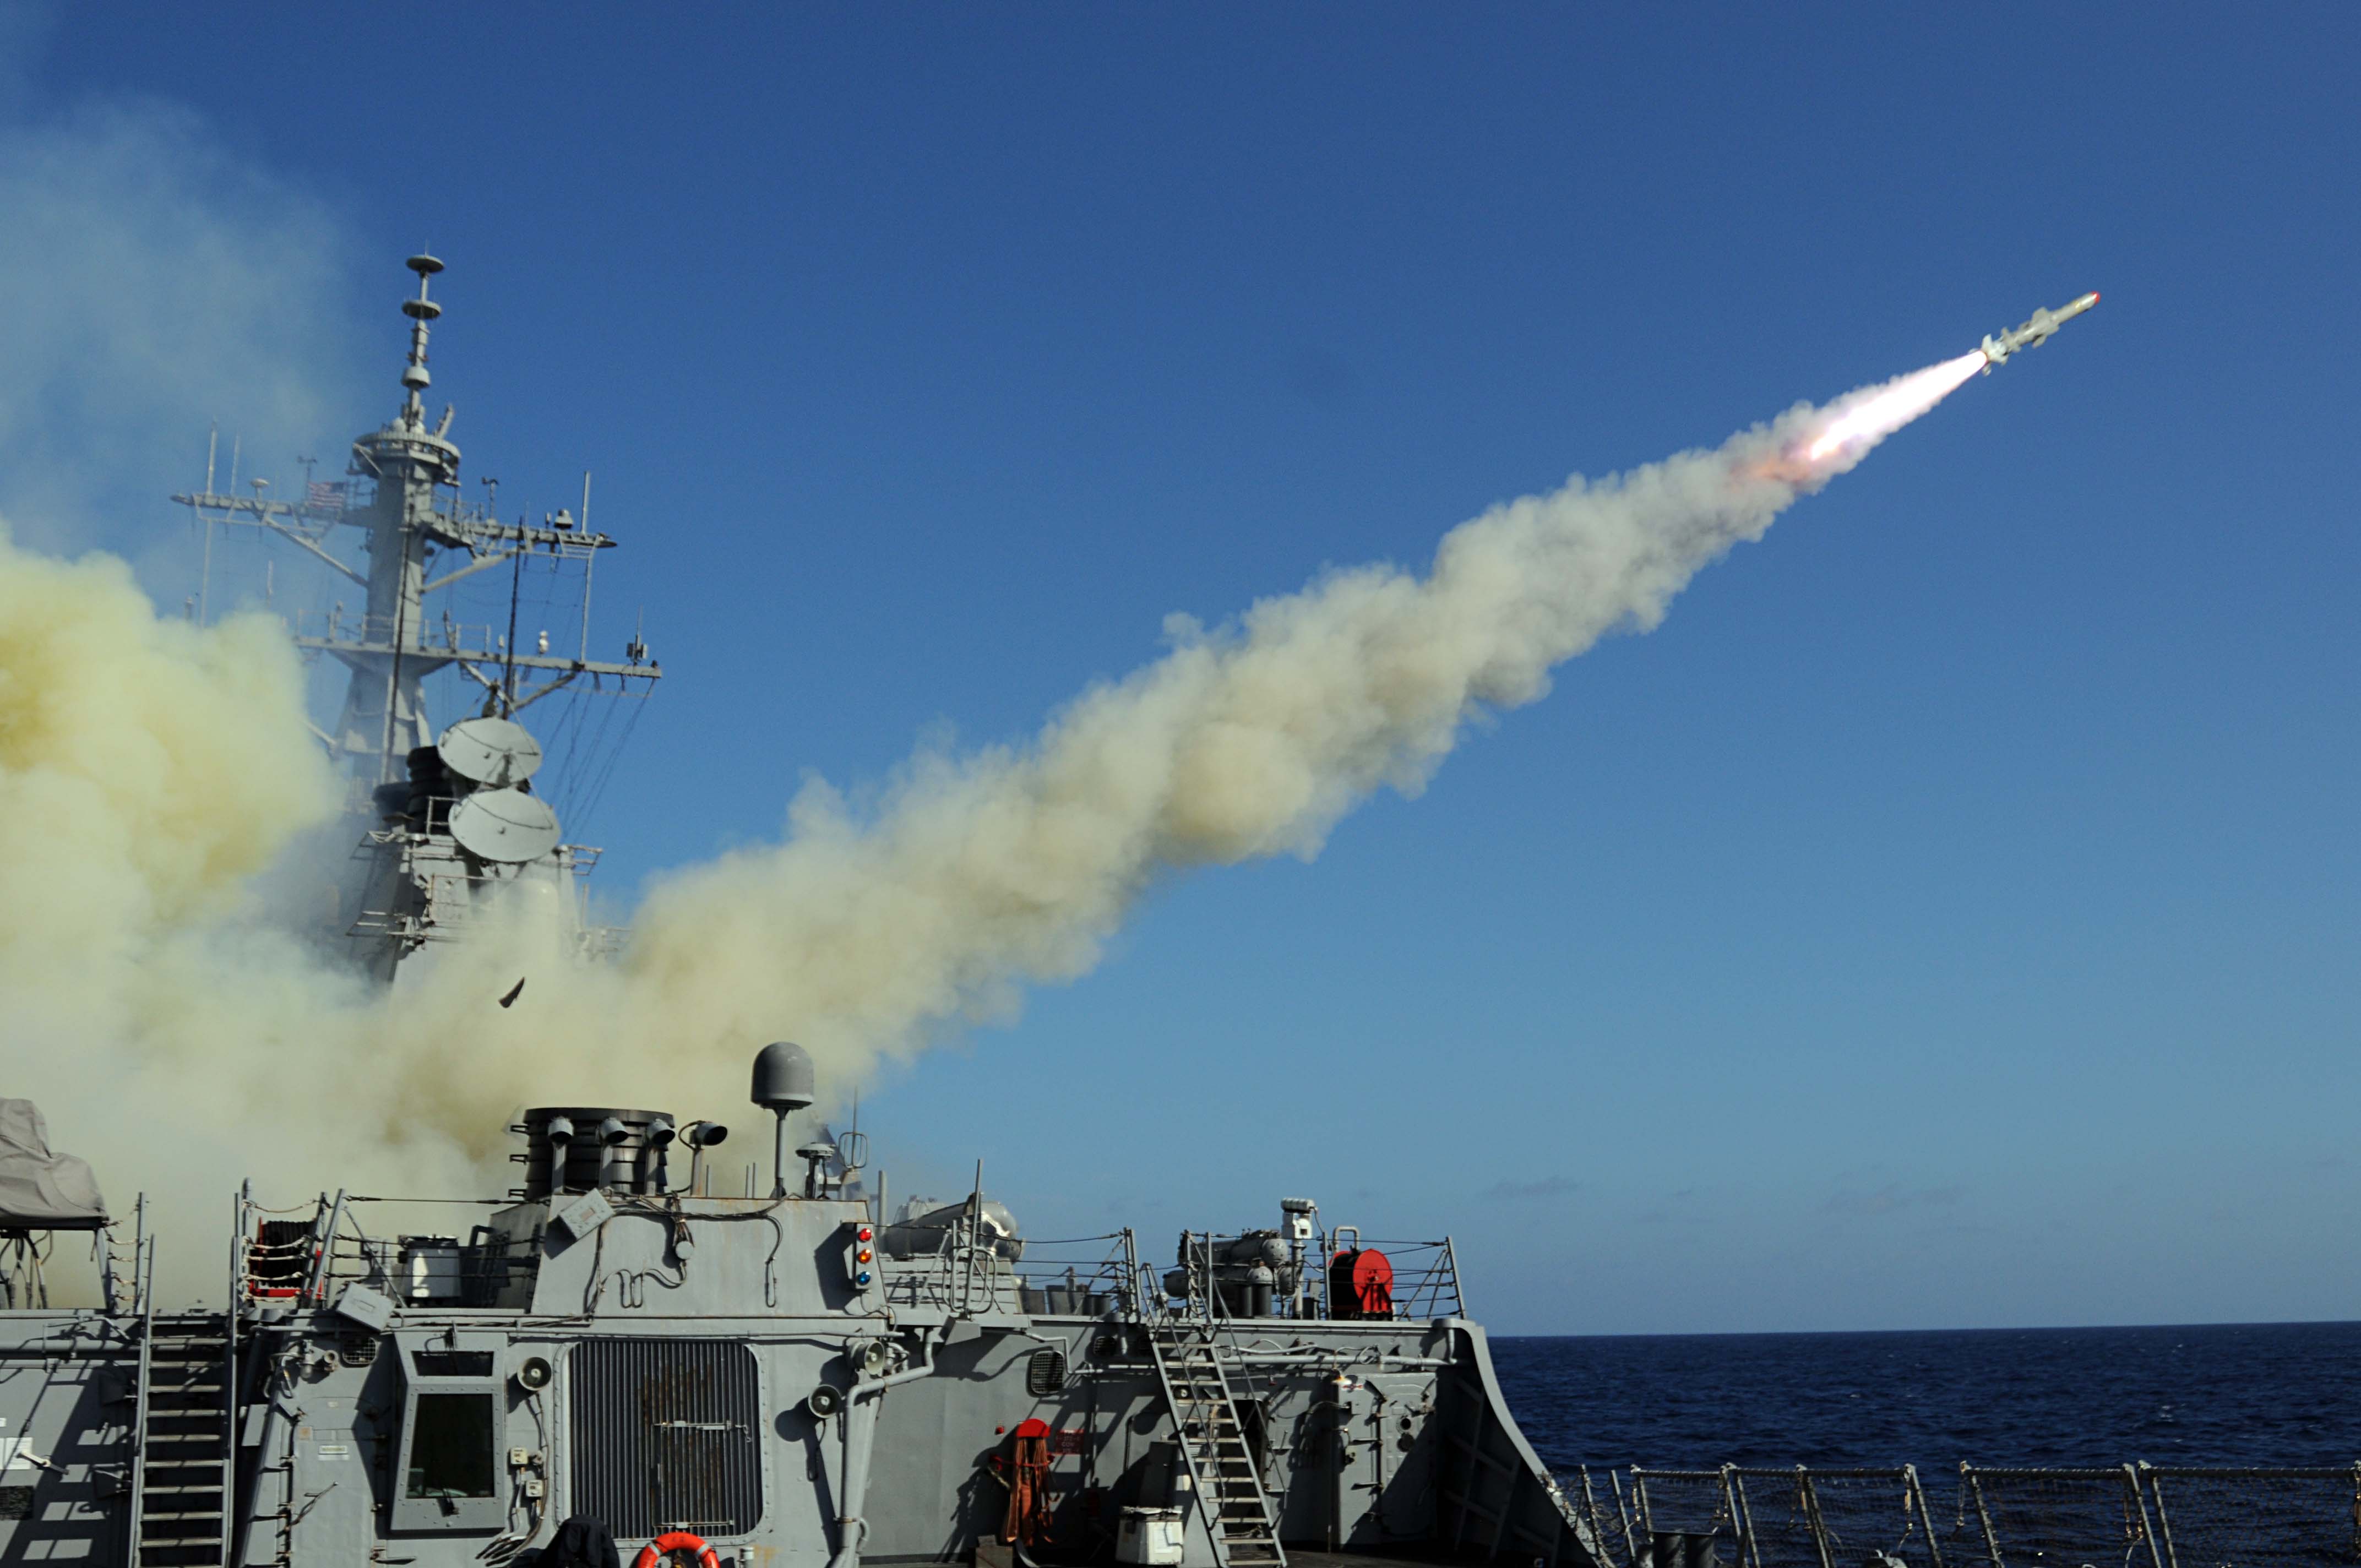 US_Navy_101027-N-1854W-010_he_guided-missile_destroyer_USS_Mitscher_(DDG_57)_launches_a_Harpoon_anti-ship_missile_at_the_ex-USNS_Saturn_during_a_si.jpg